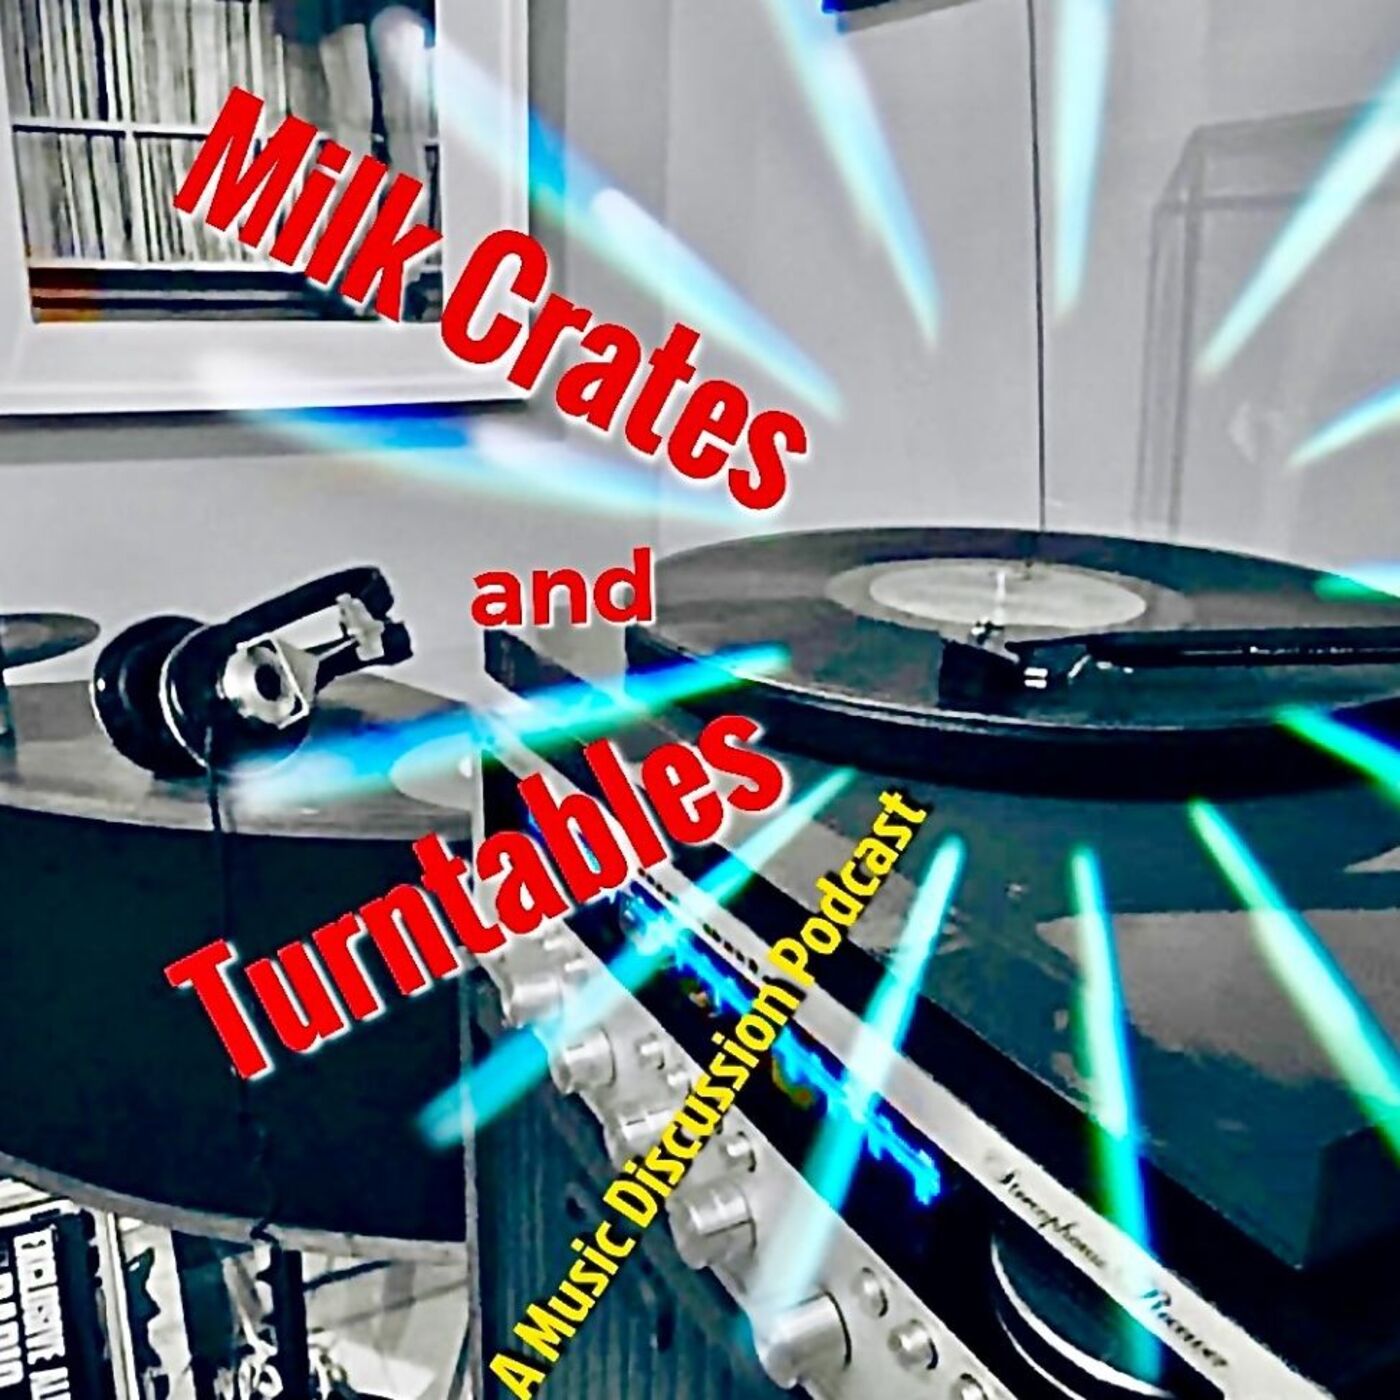 Fresh update on "lynn" discussed on Milk Crates and Turntables. A Music Discussion Podcast